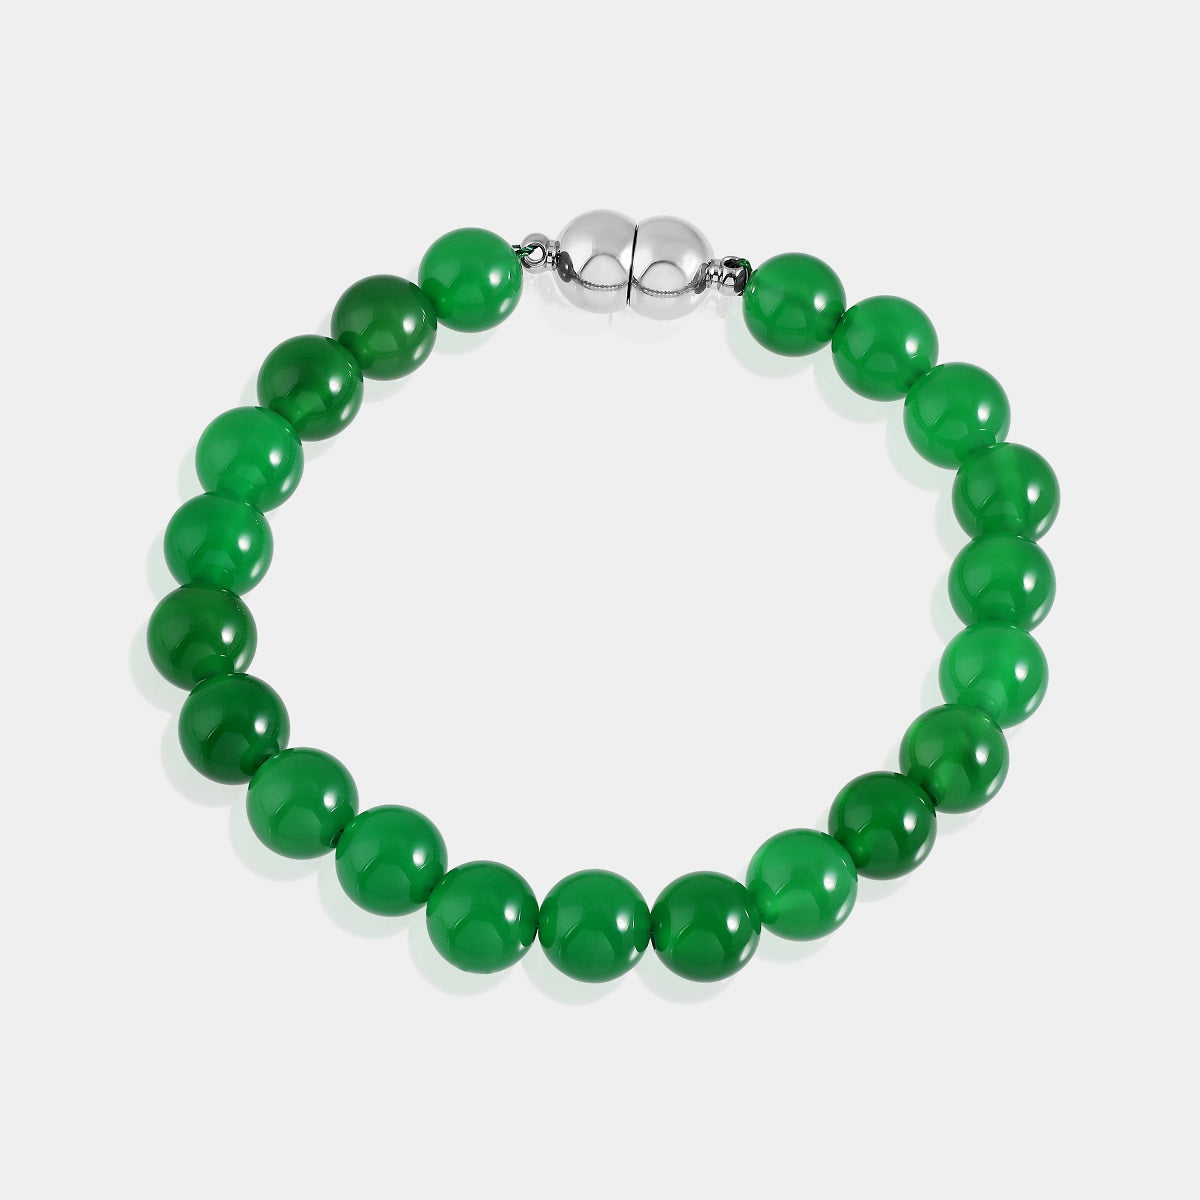 Close-up of the Green Onyx gemstone beads, known for their vitality and harmonious energy